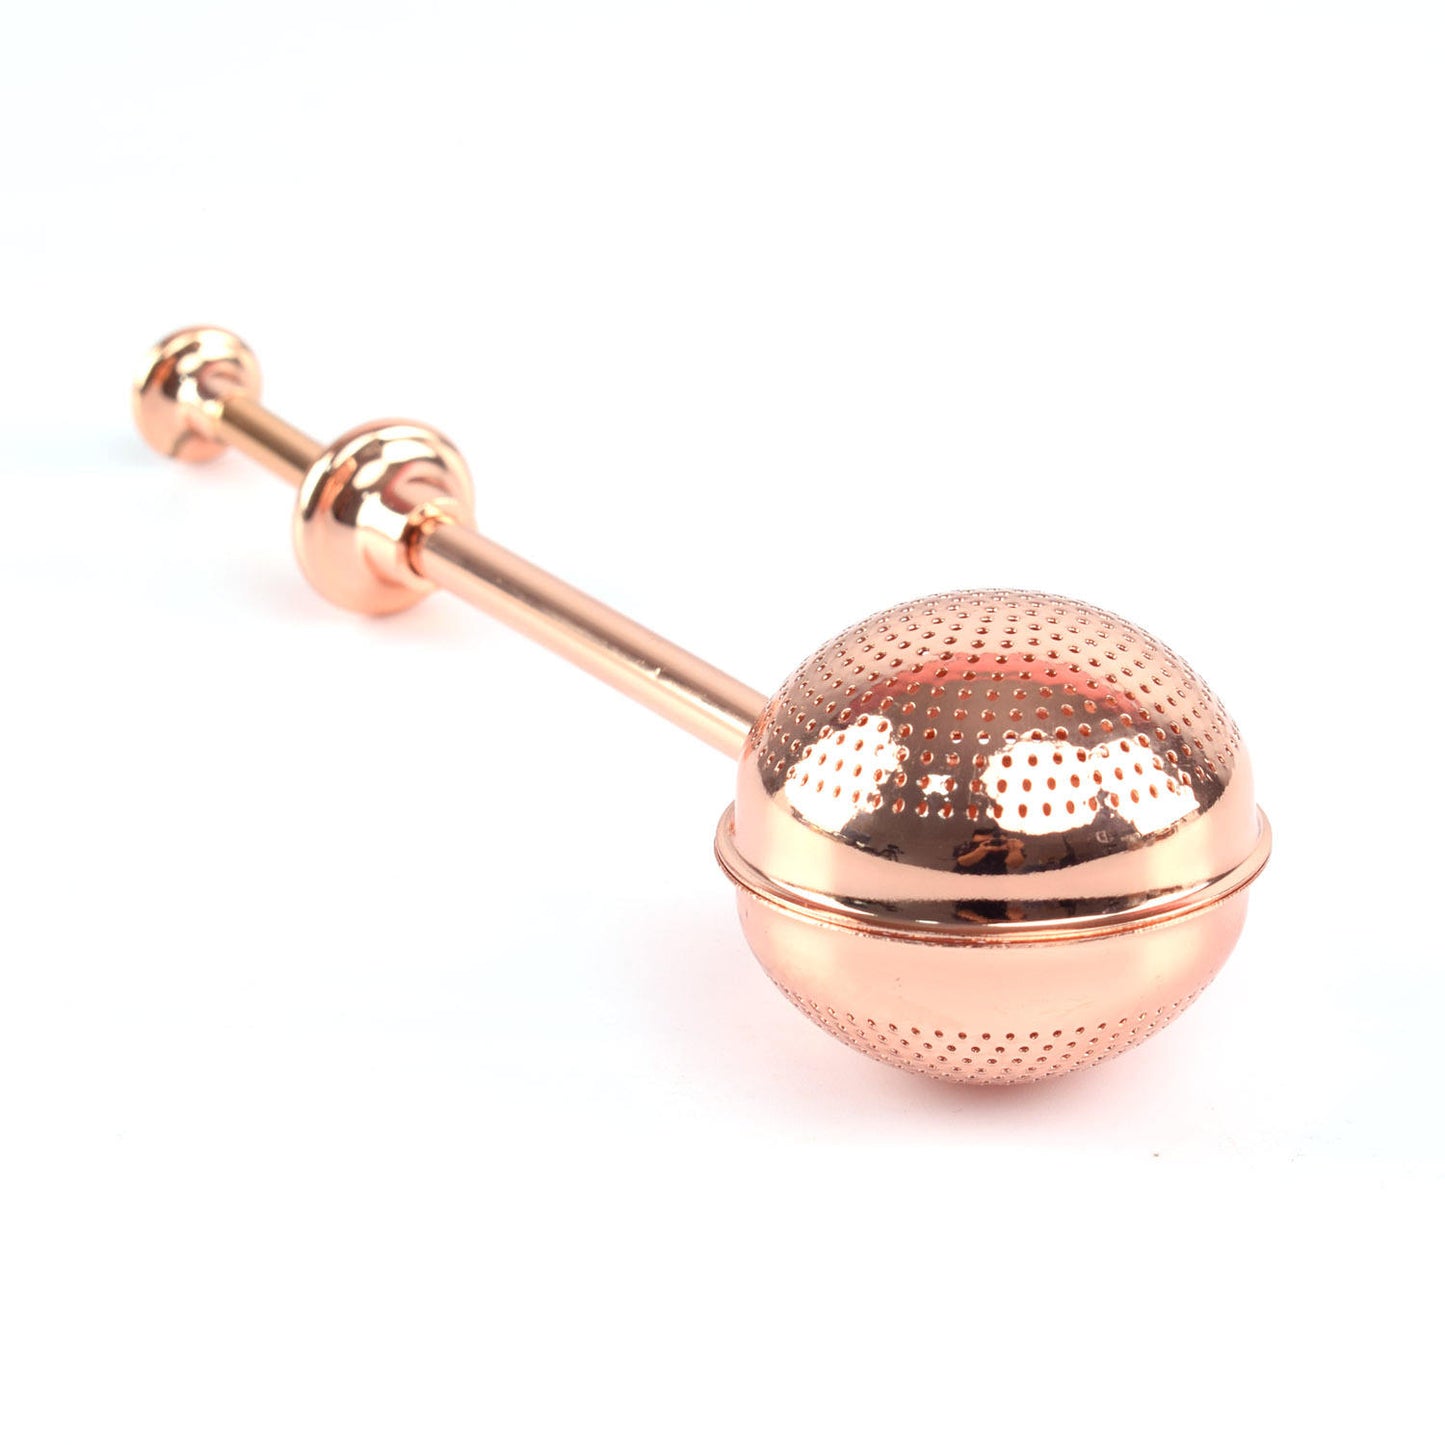 Good Karma tea infuser ball is 2-in-1 scoop and a strainer rose gold color white background